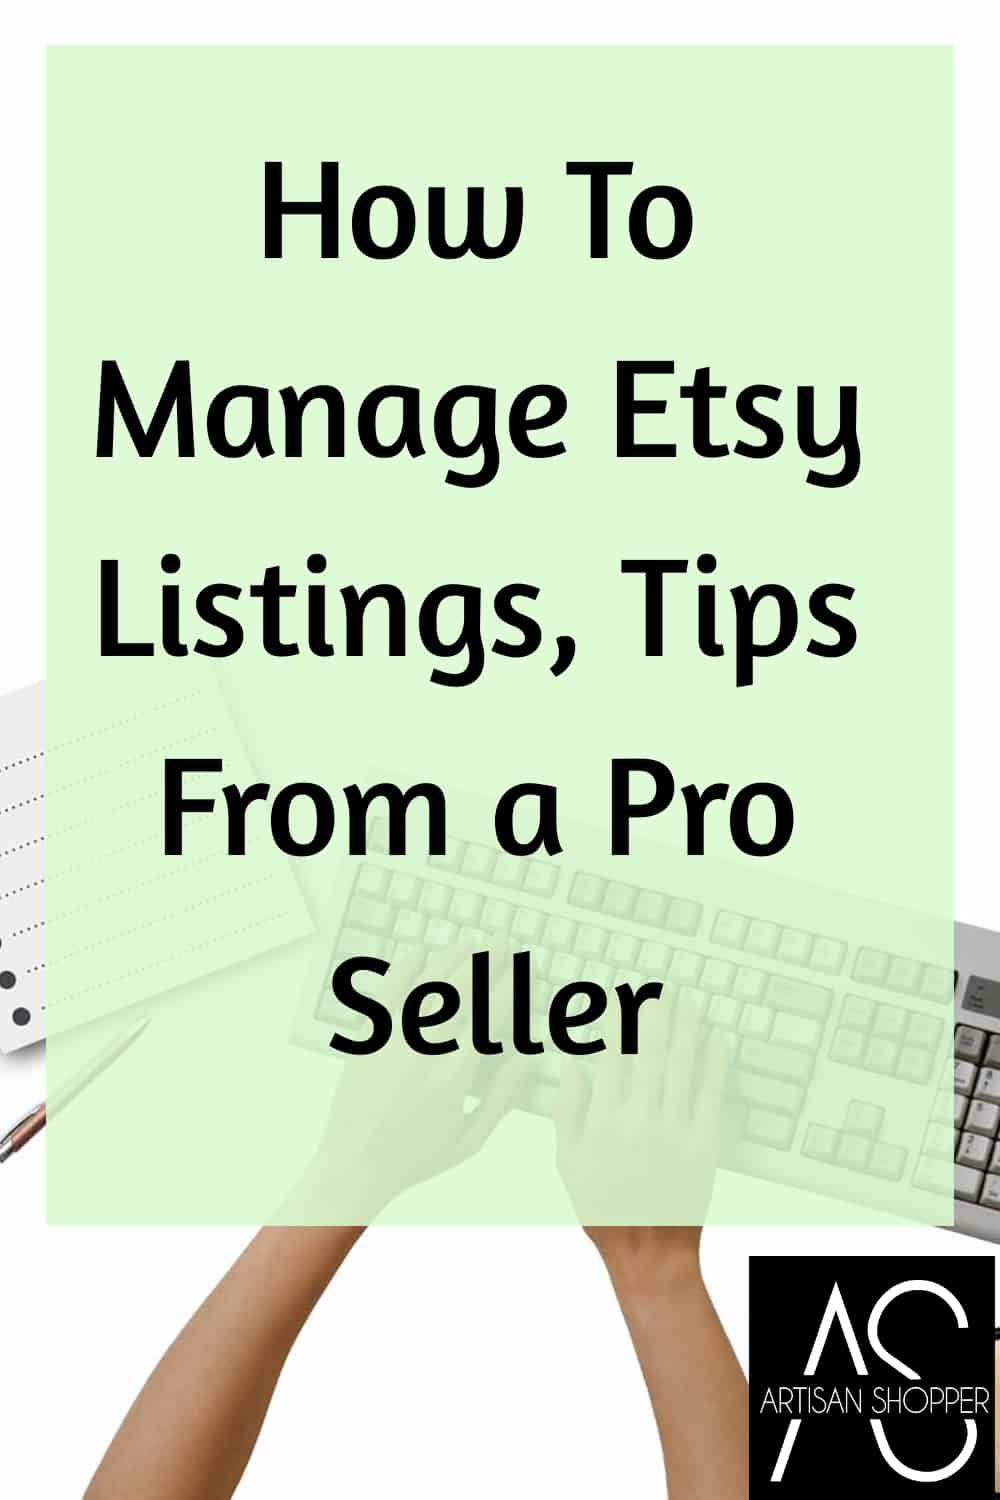 how-to-manage-etsy-listings-tips-from-a-pro-seller-artisan-shopper